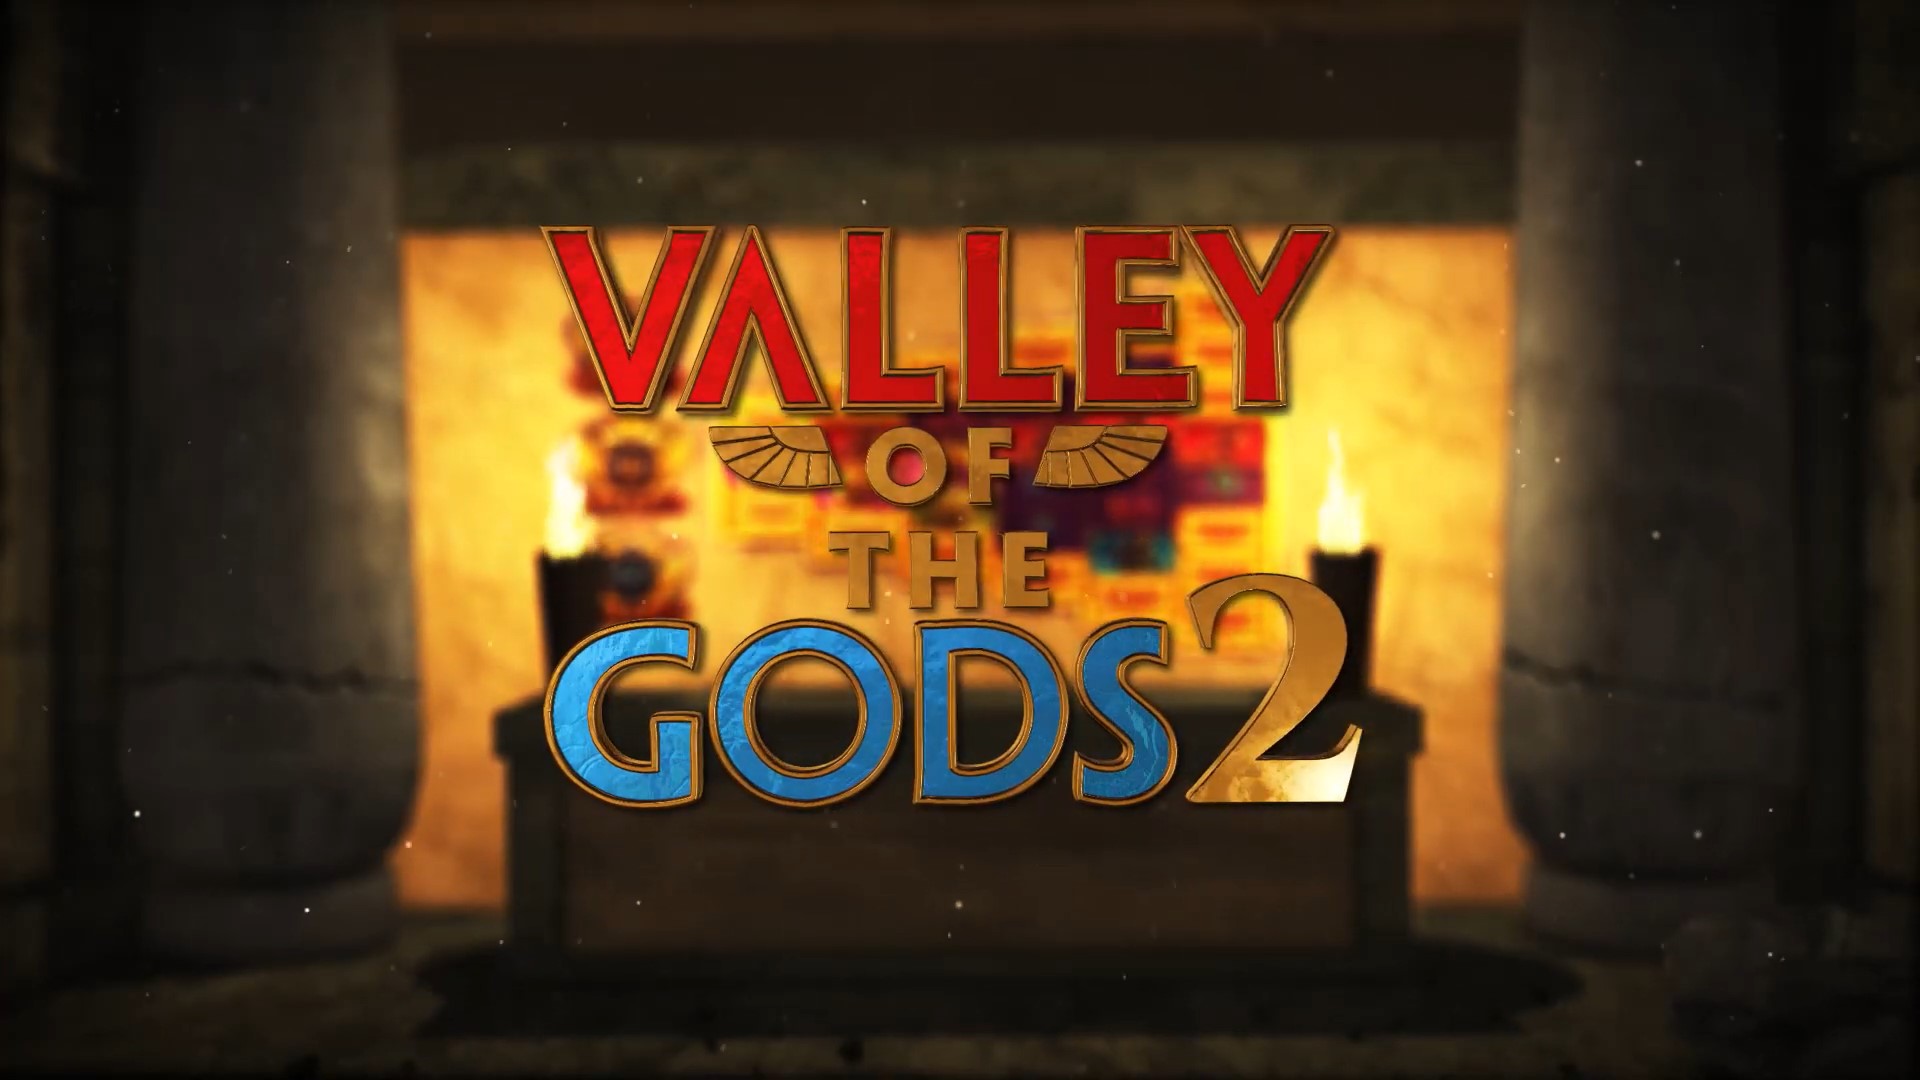 Valley of the Gods 2 Yggdrasil